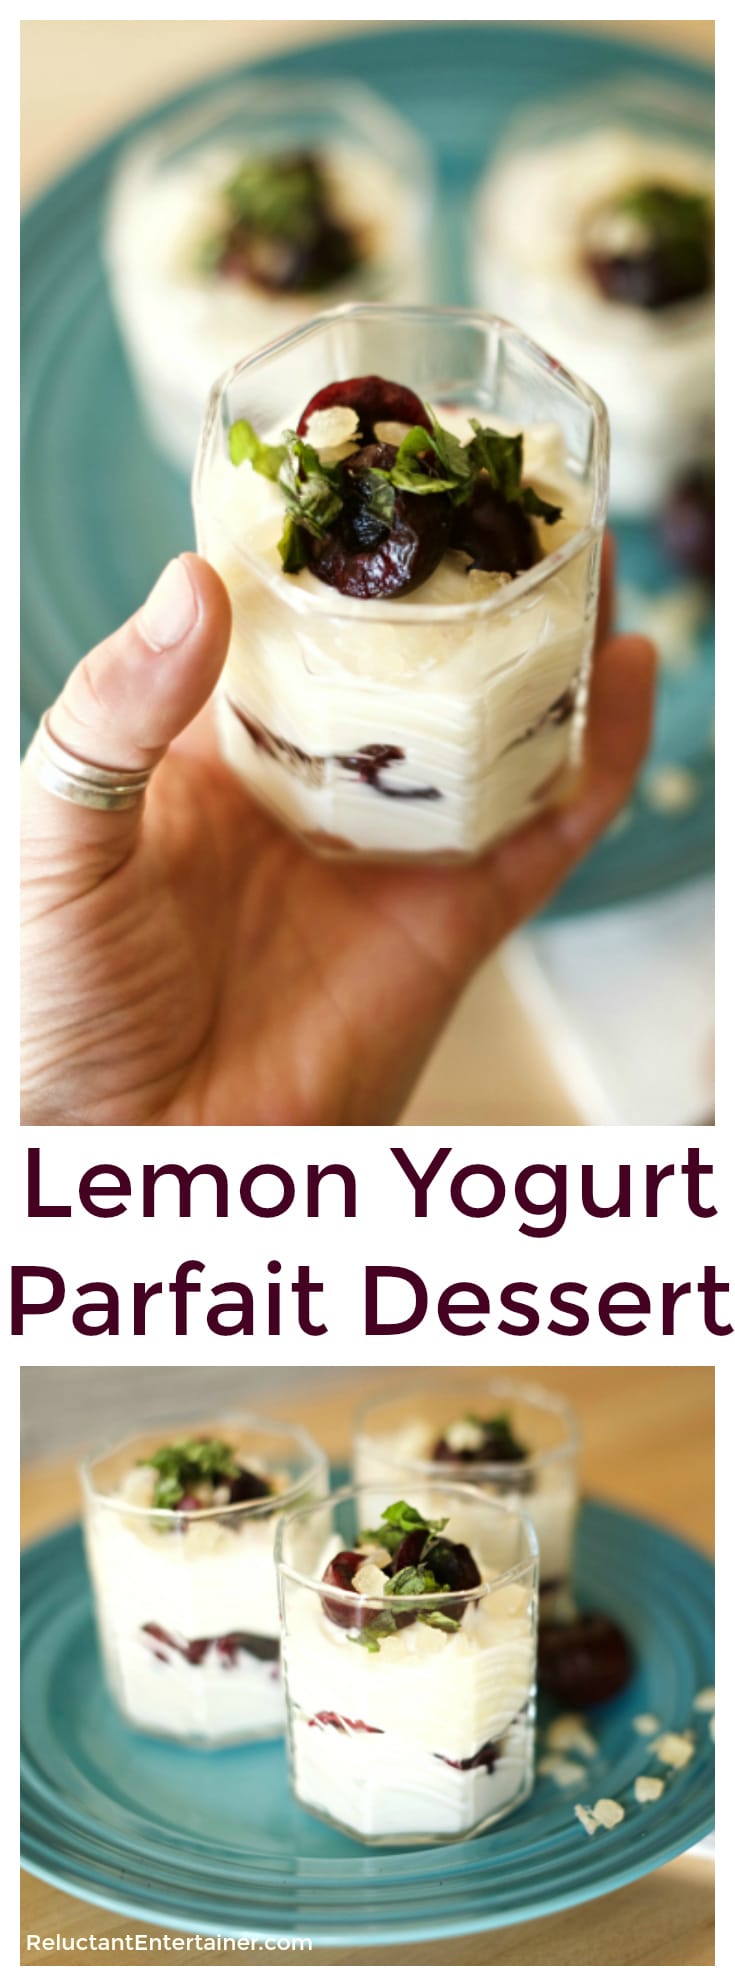 This Lemon Yogurt Parfait dessert is delicious for breakfast, but is so cheesecakey rich and sweet, it can easily pass as dessert for dinner!